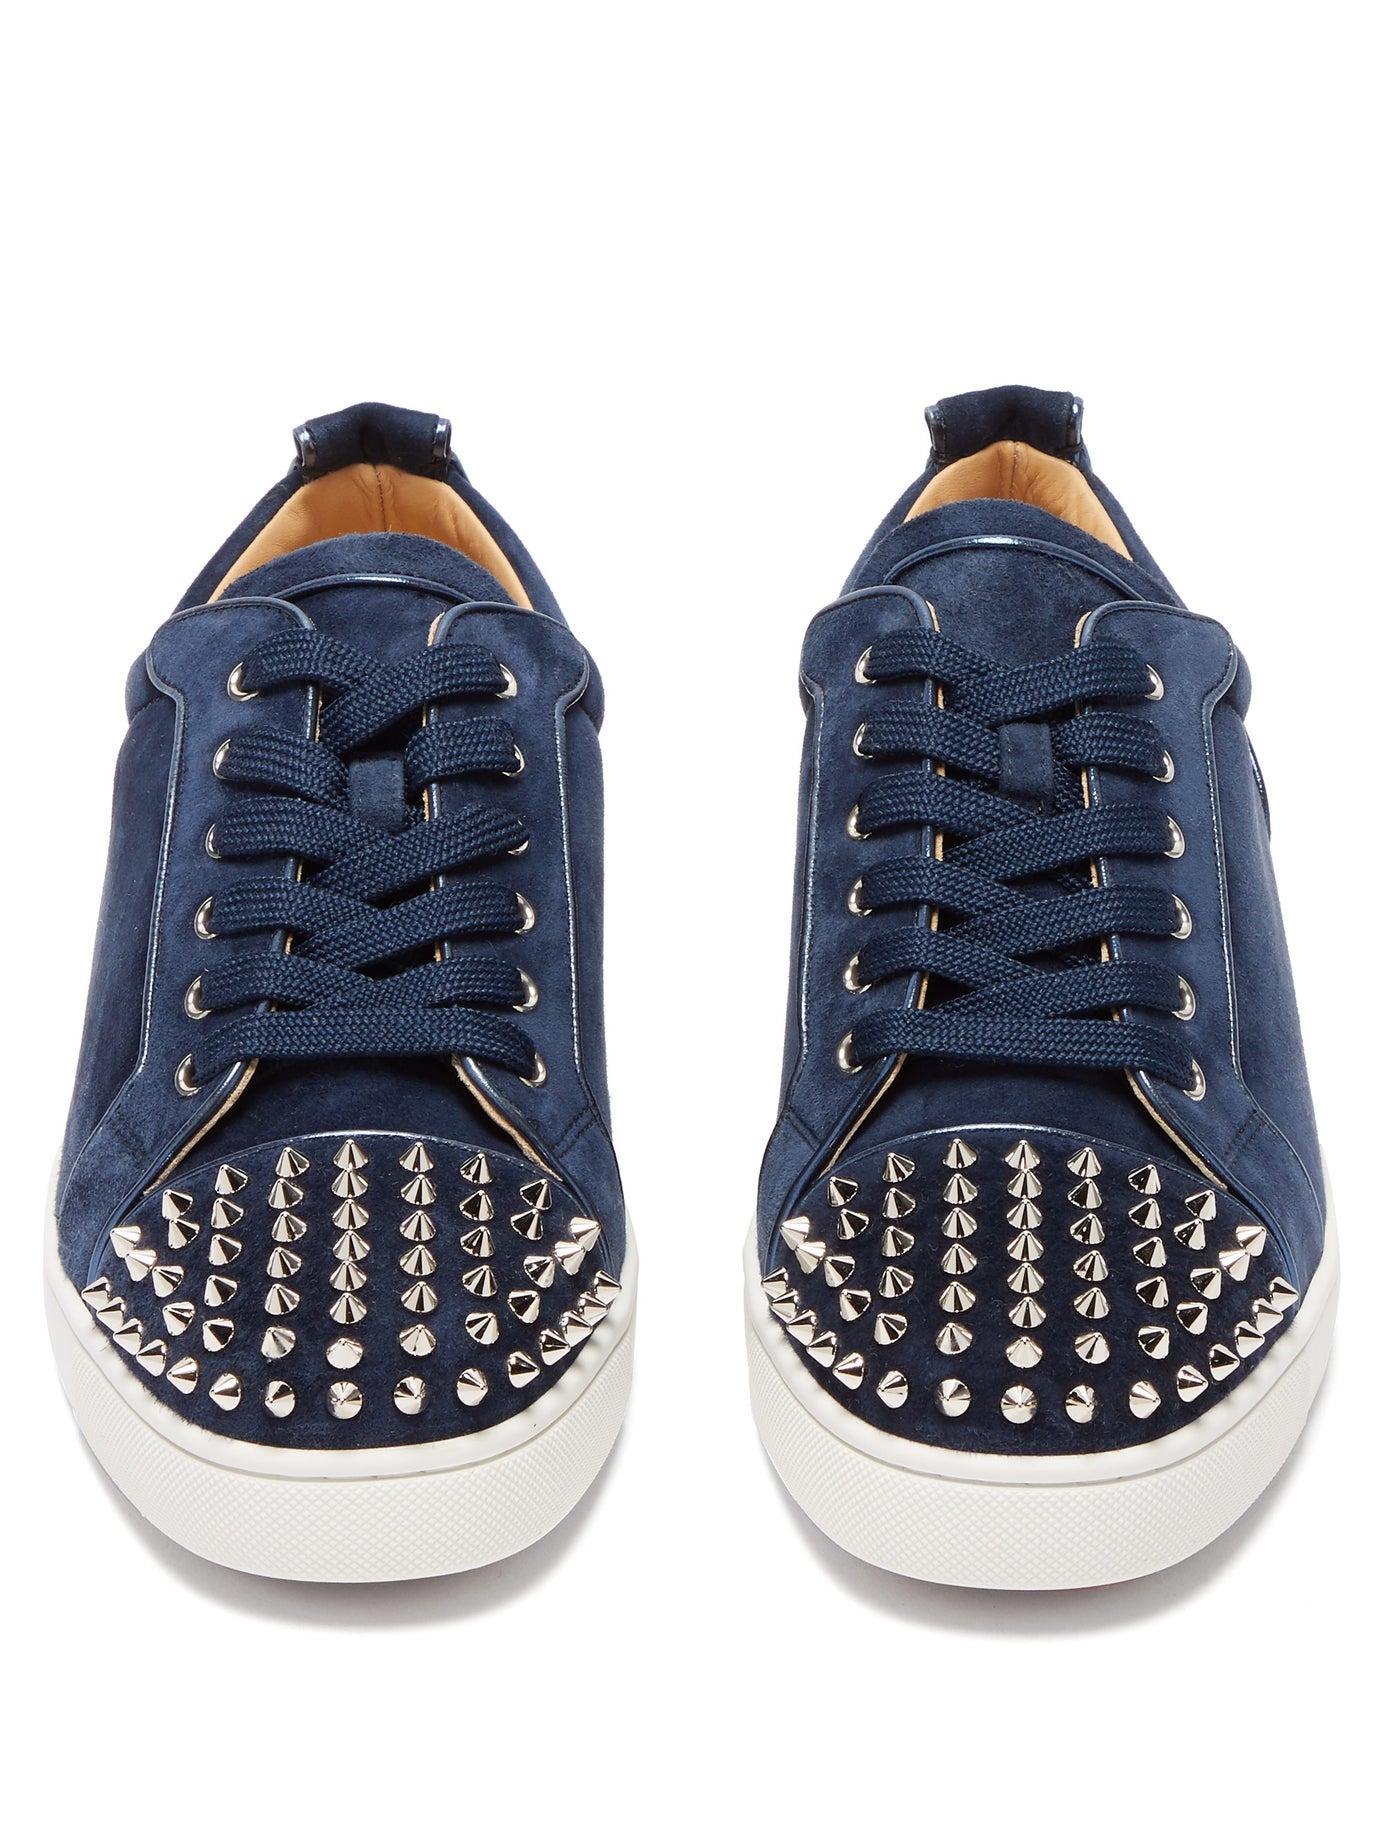 Christian Louboutin Louis Junior Studded Suede Trainers in Marine (Blue)  for Men - Lyst